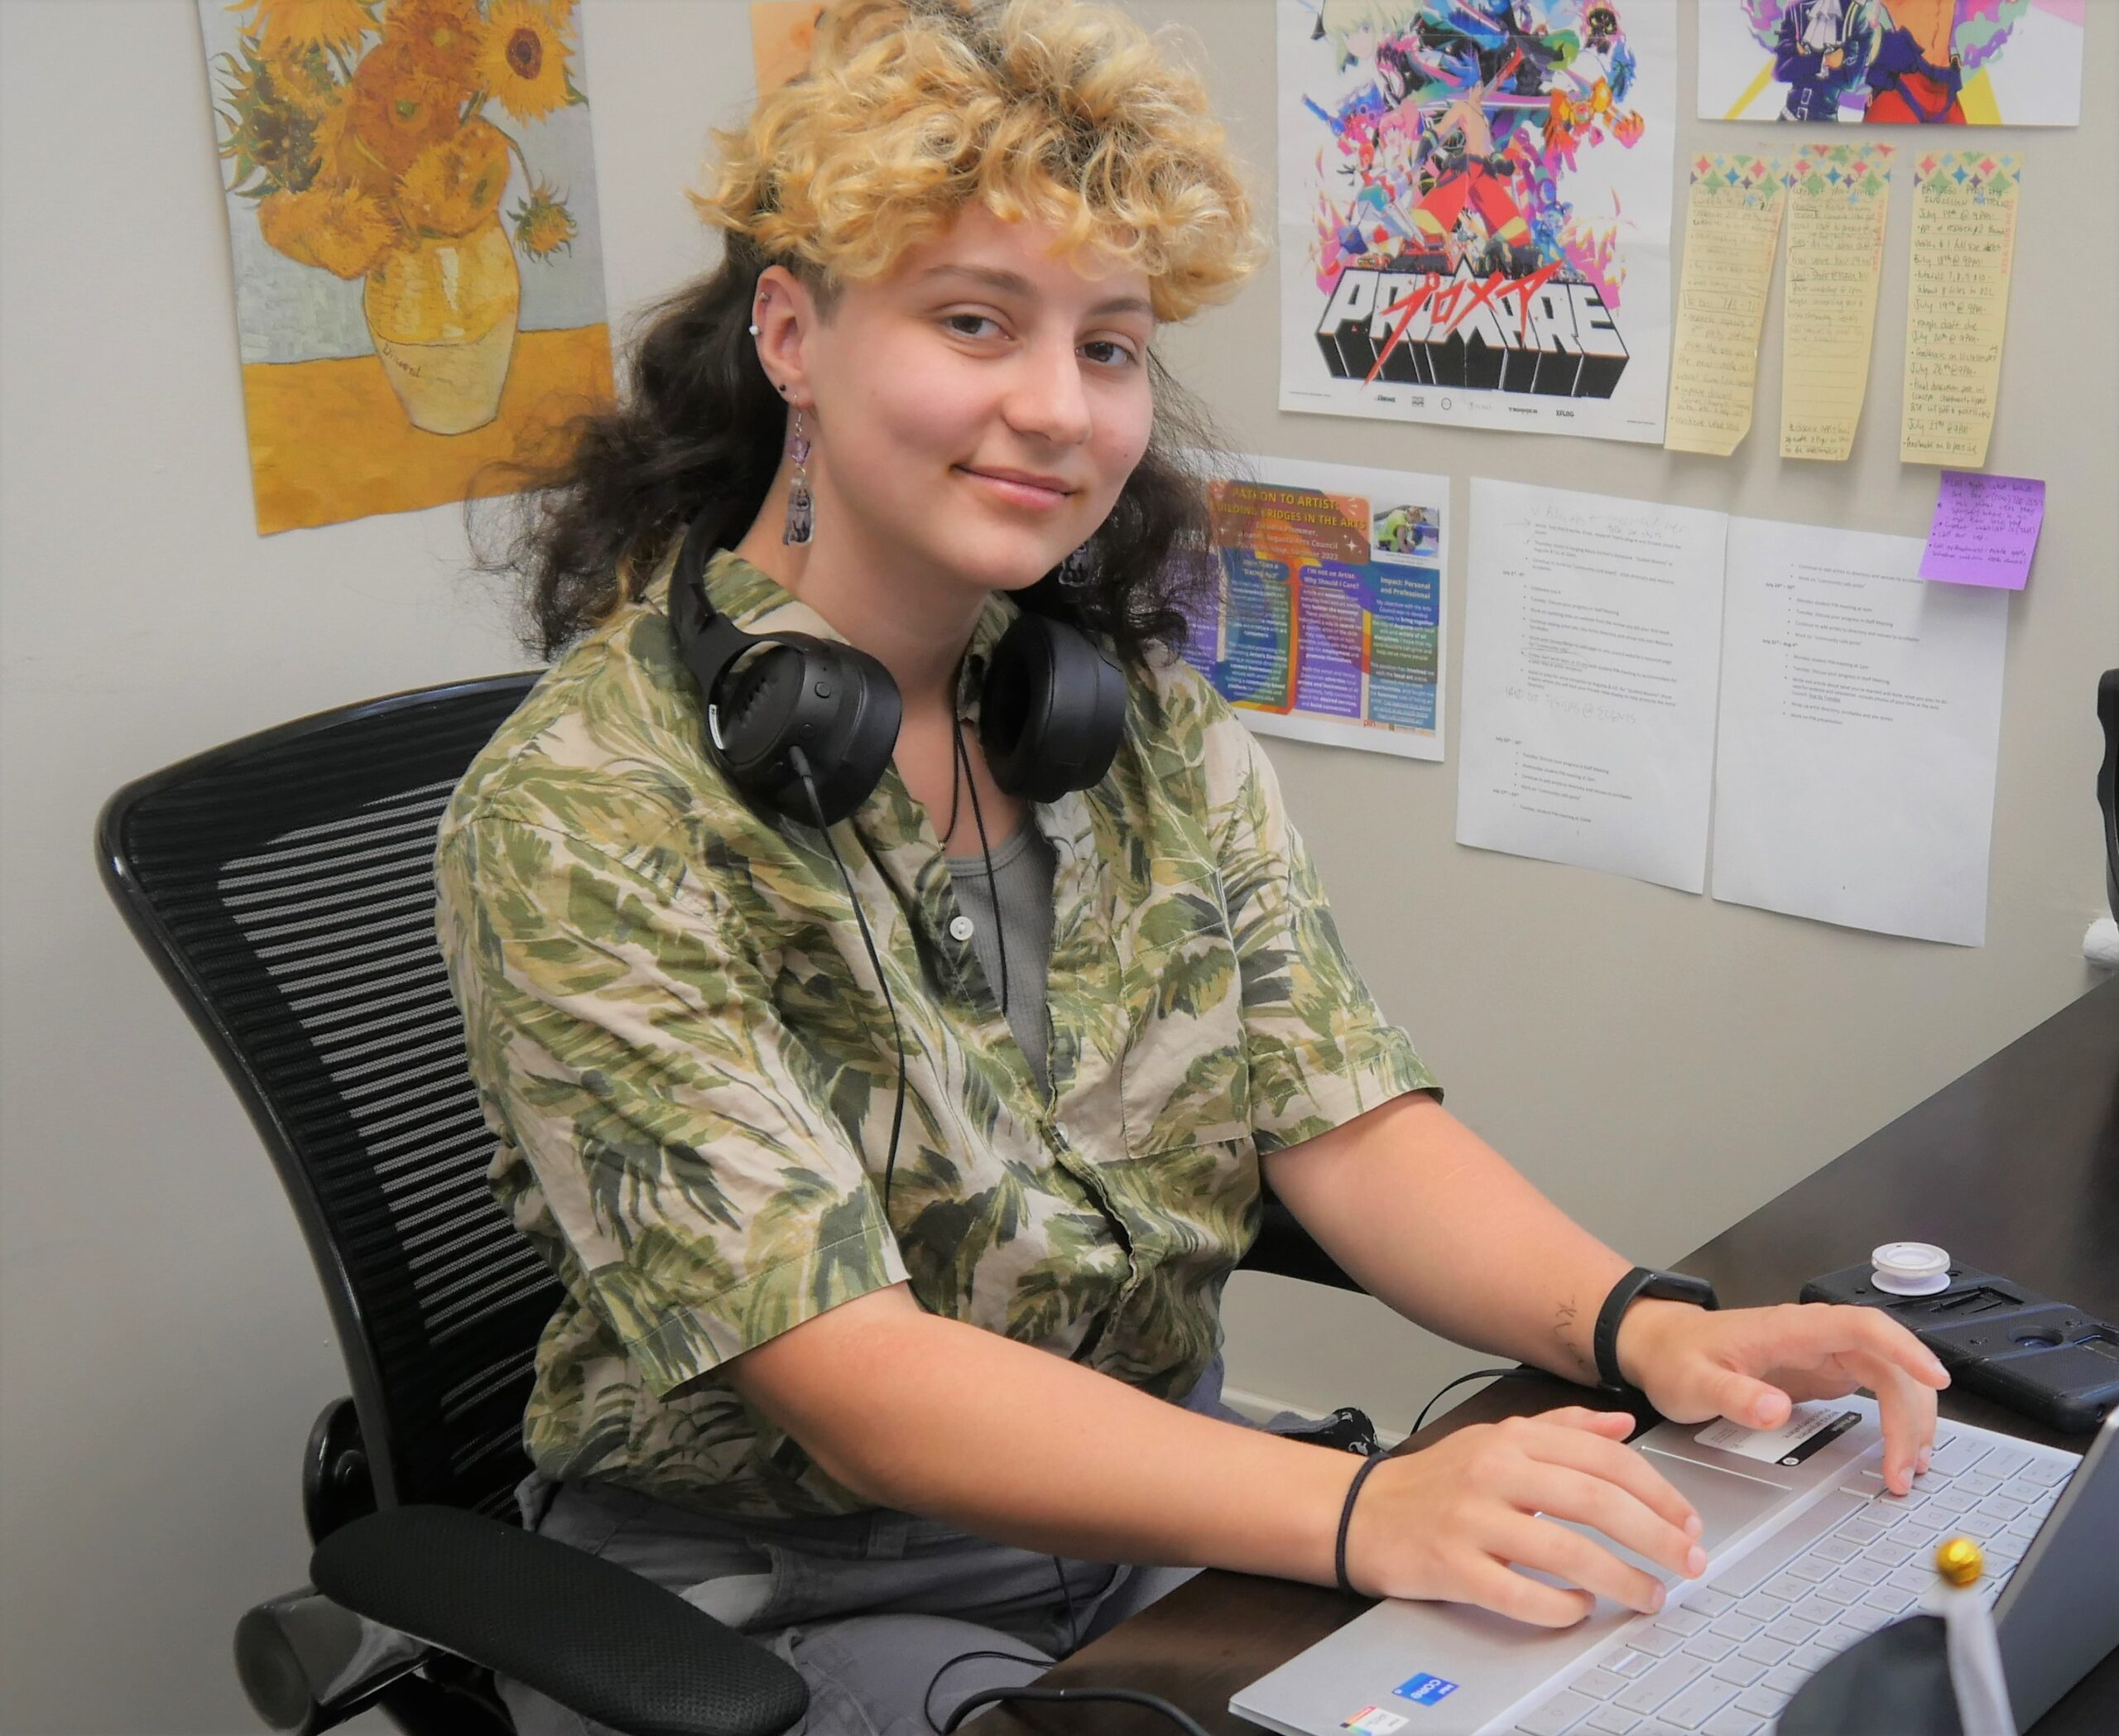 Galadra Plummer sitting at a desk. They are a caucasian person with a brown and blonde mullet and a green patterned shirt